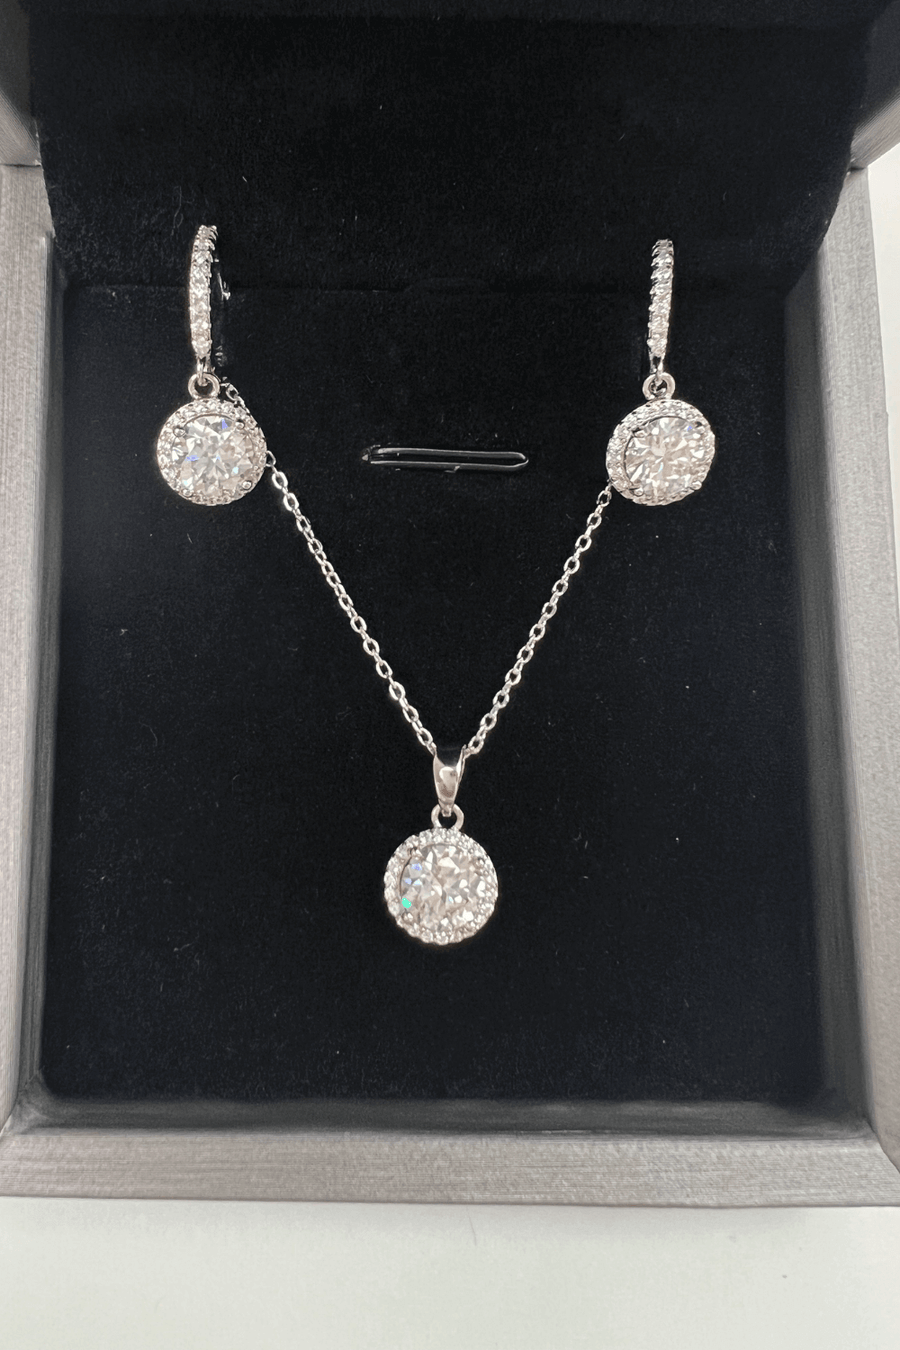 1# BEST Diamond Round Necklace, Earrings Jewelry Bundle Set Gift for Women | #1 Best Most Top Trendy Trending Round Diamond Necklace, Earrings Jewelry Gift for Women, Mother, Wife, Daughter, Ladies | MASON New York